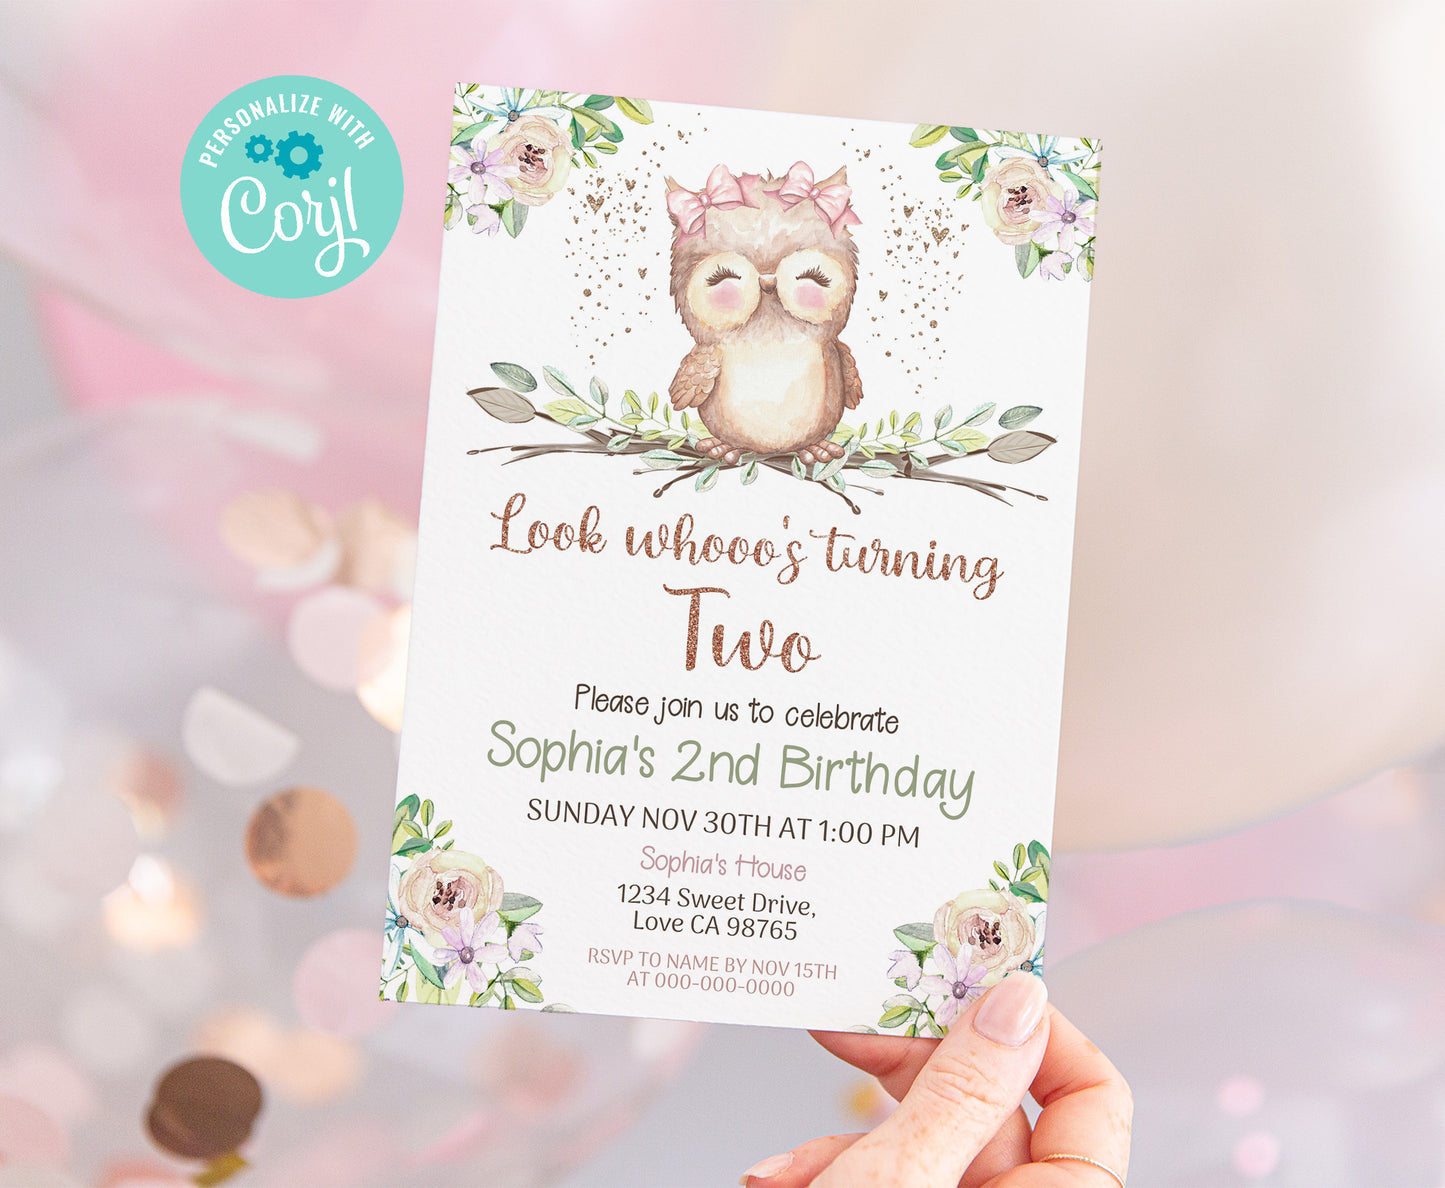 Look Whooo's Turning One Invitation | Owl Girl Birthday Party Invite- 78A